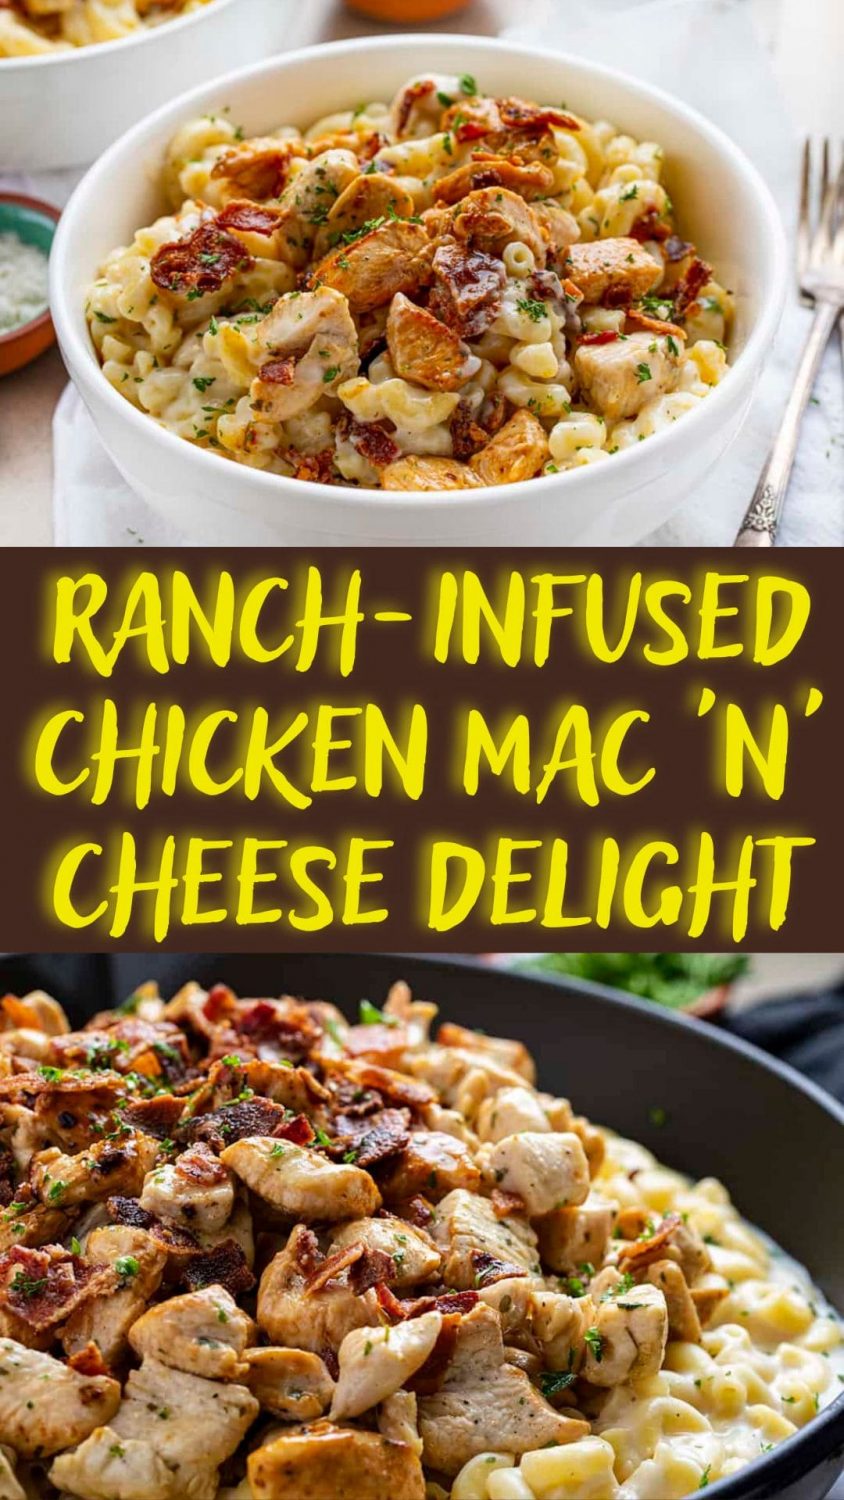 Ranch-Infused Chicken Mac 'n' Cheese Delight